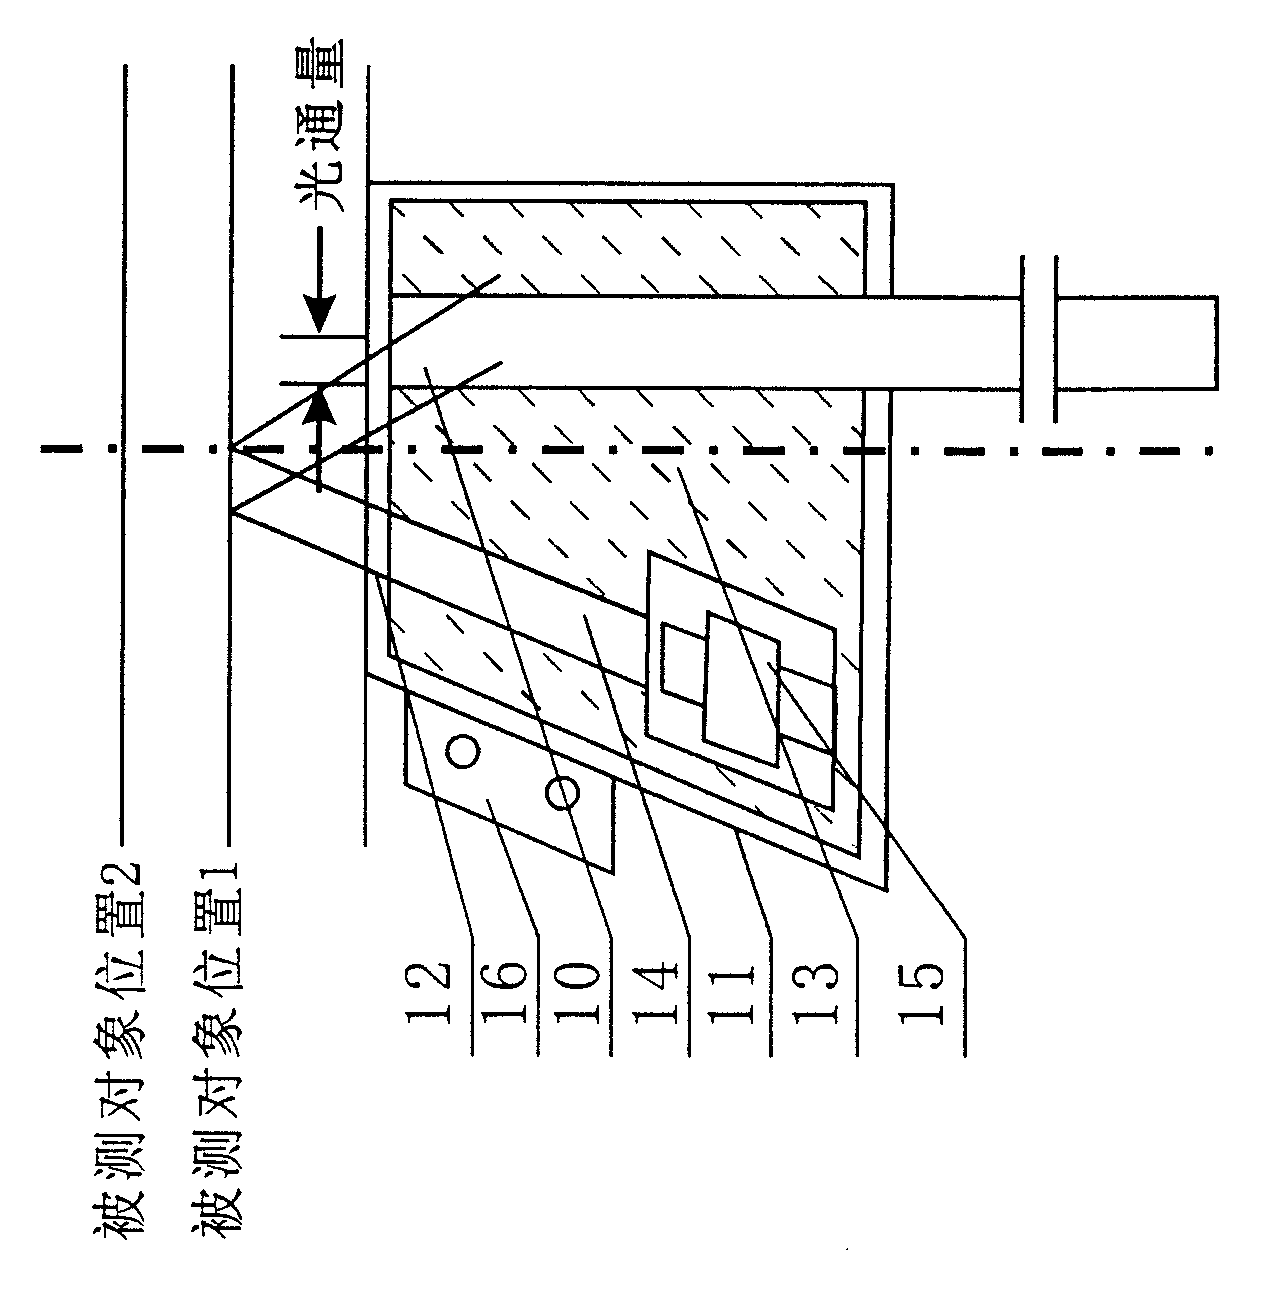 Multi-channel real-time online optical fiber displacement detecting and controlling instrument